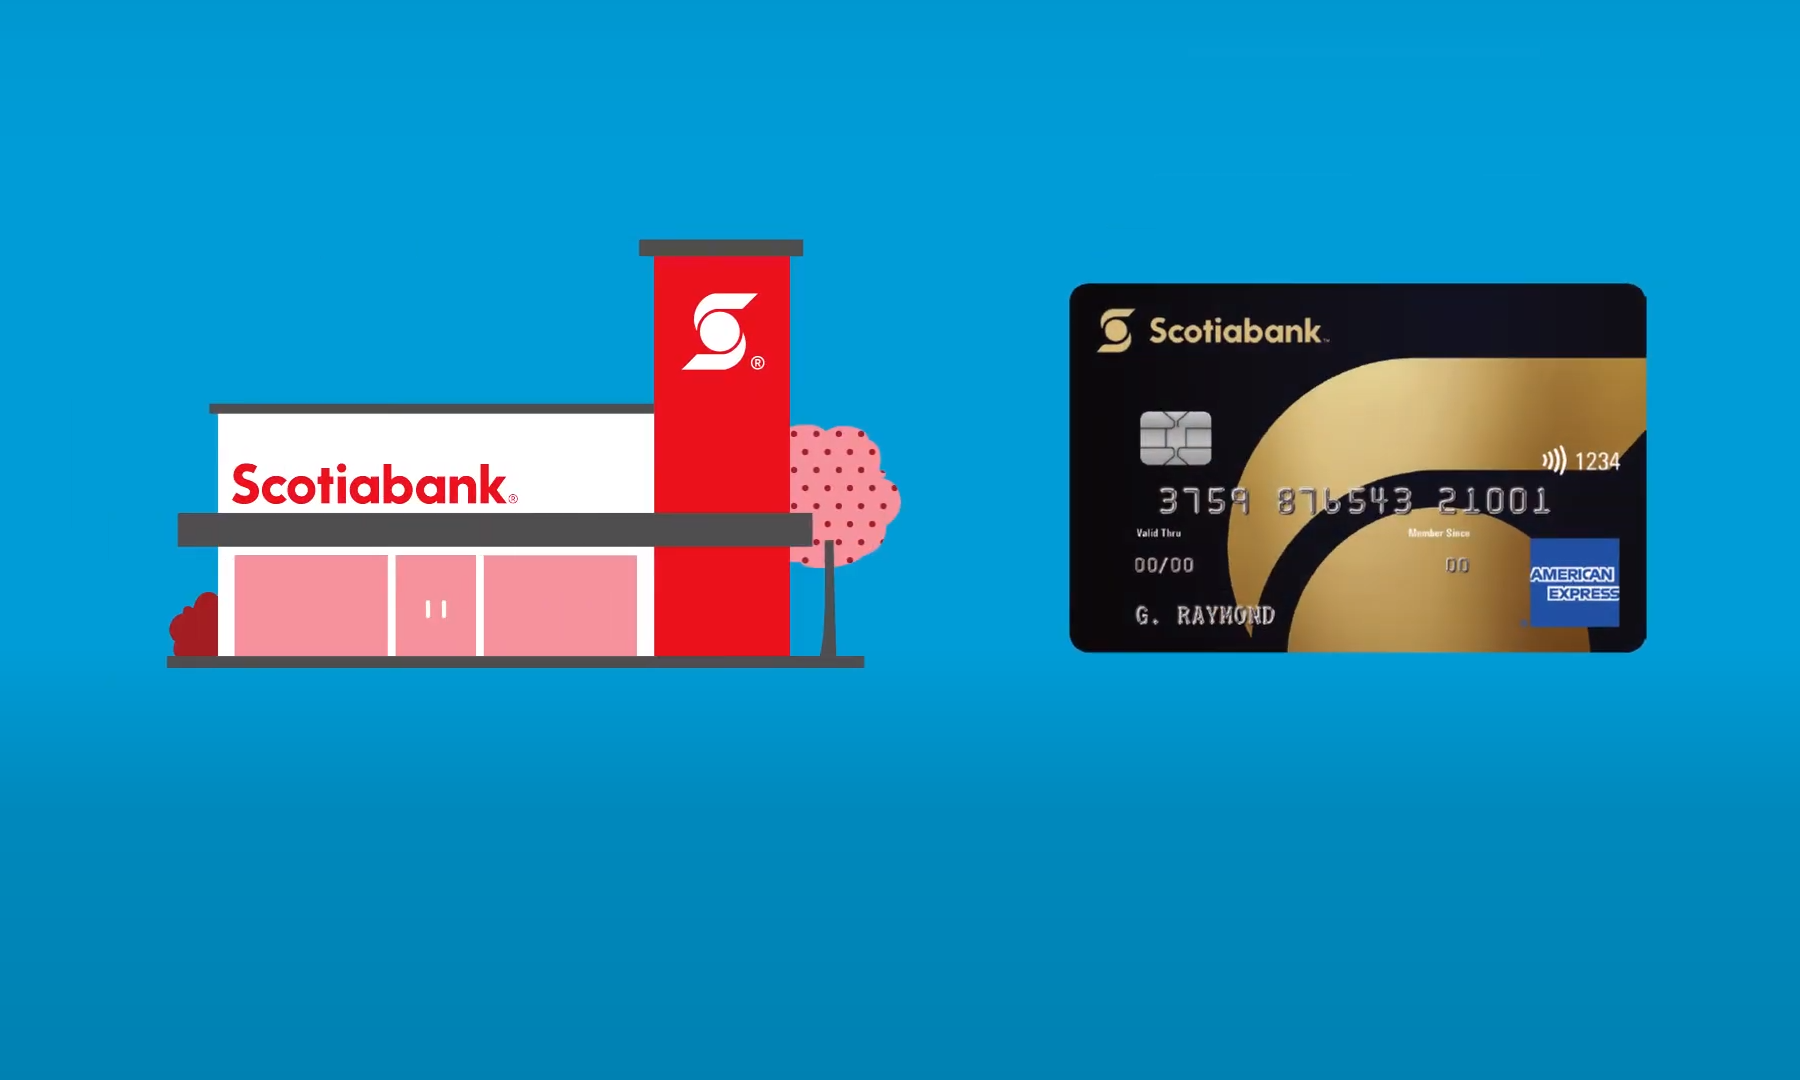  Scotiabank Gold American Express® card offers rewards, welcome bonuses, and more. Source: Youtube Scotiabank.